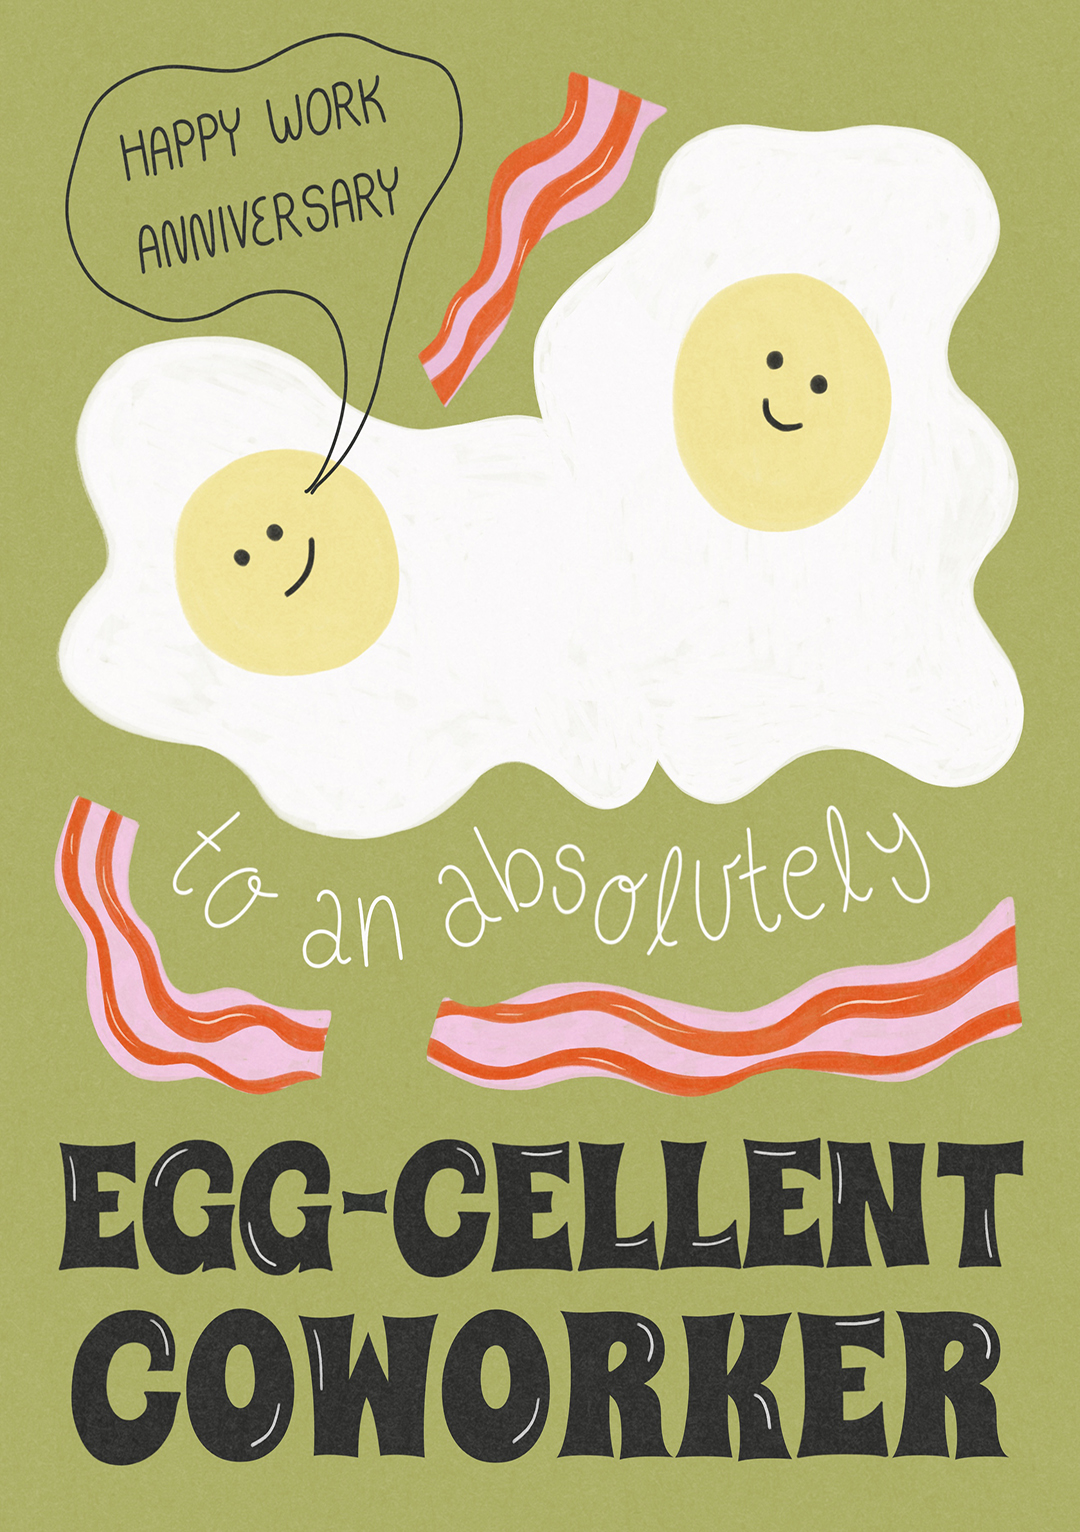 Happy Work Anniversary To An Absolutely Egg-cellent Co-Worker